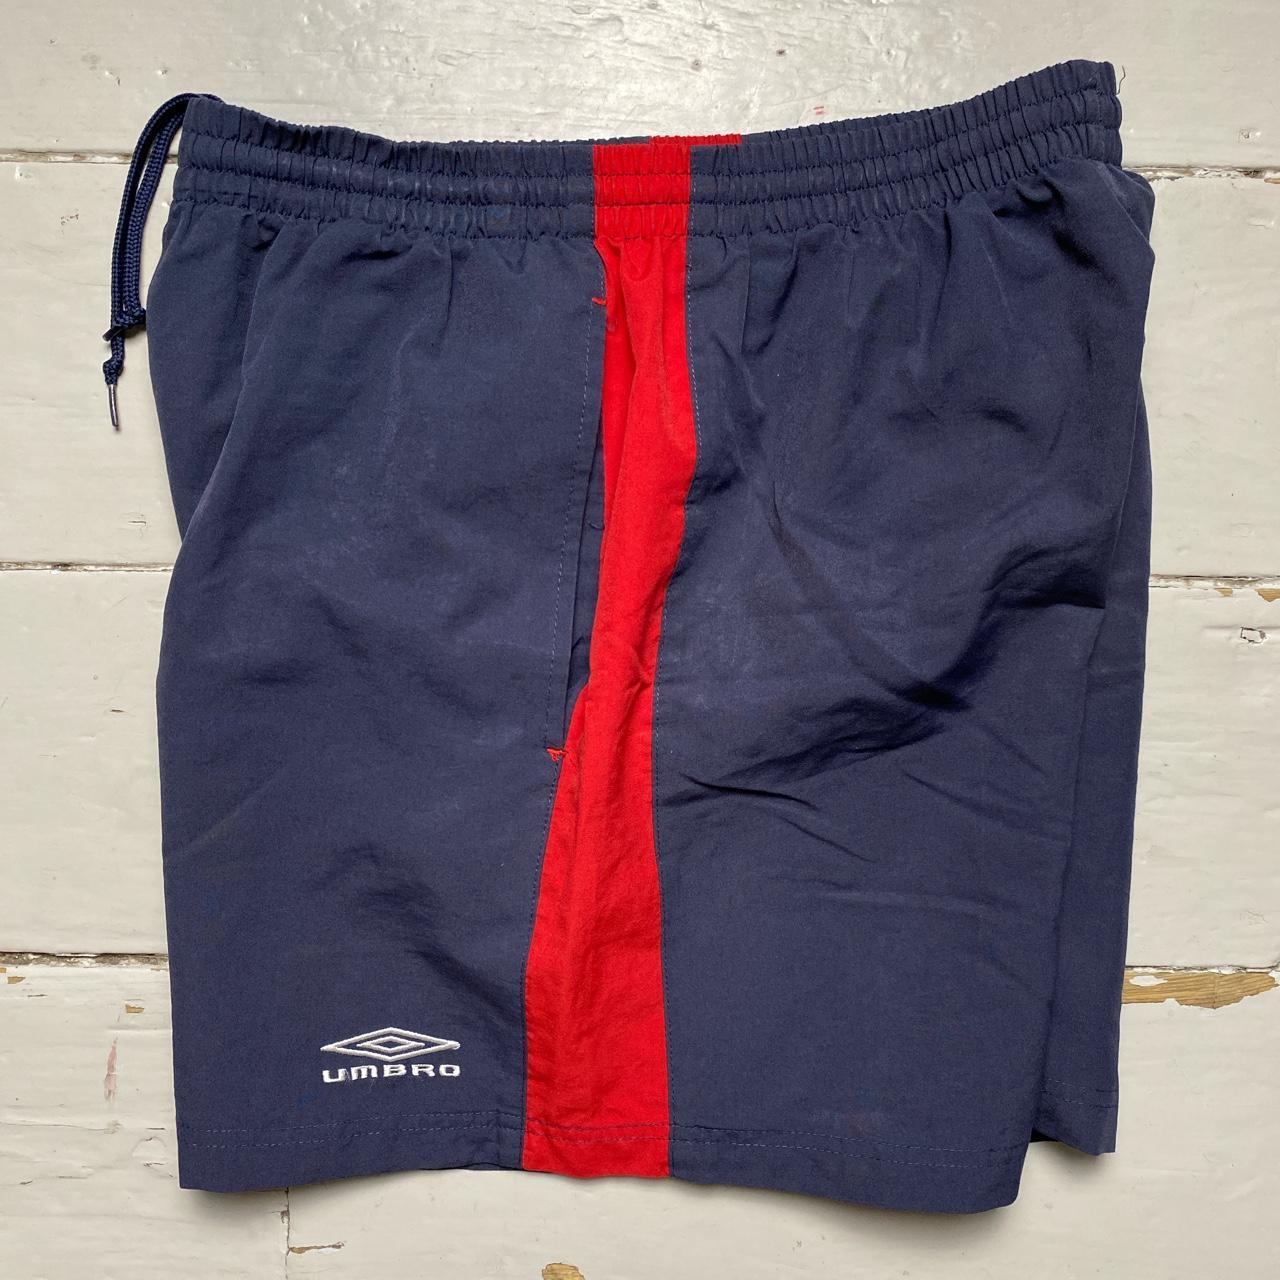 Umbro Navy and Red Shell Track Pant Shorts